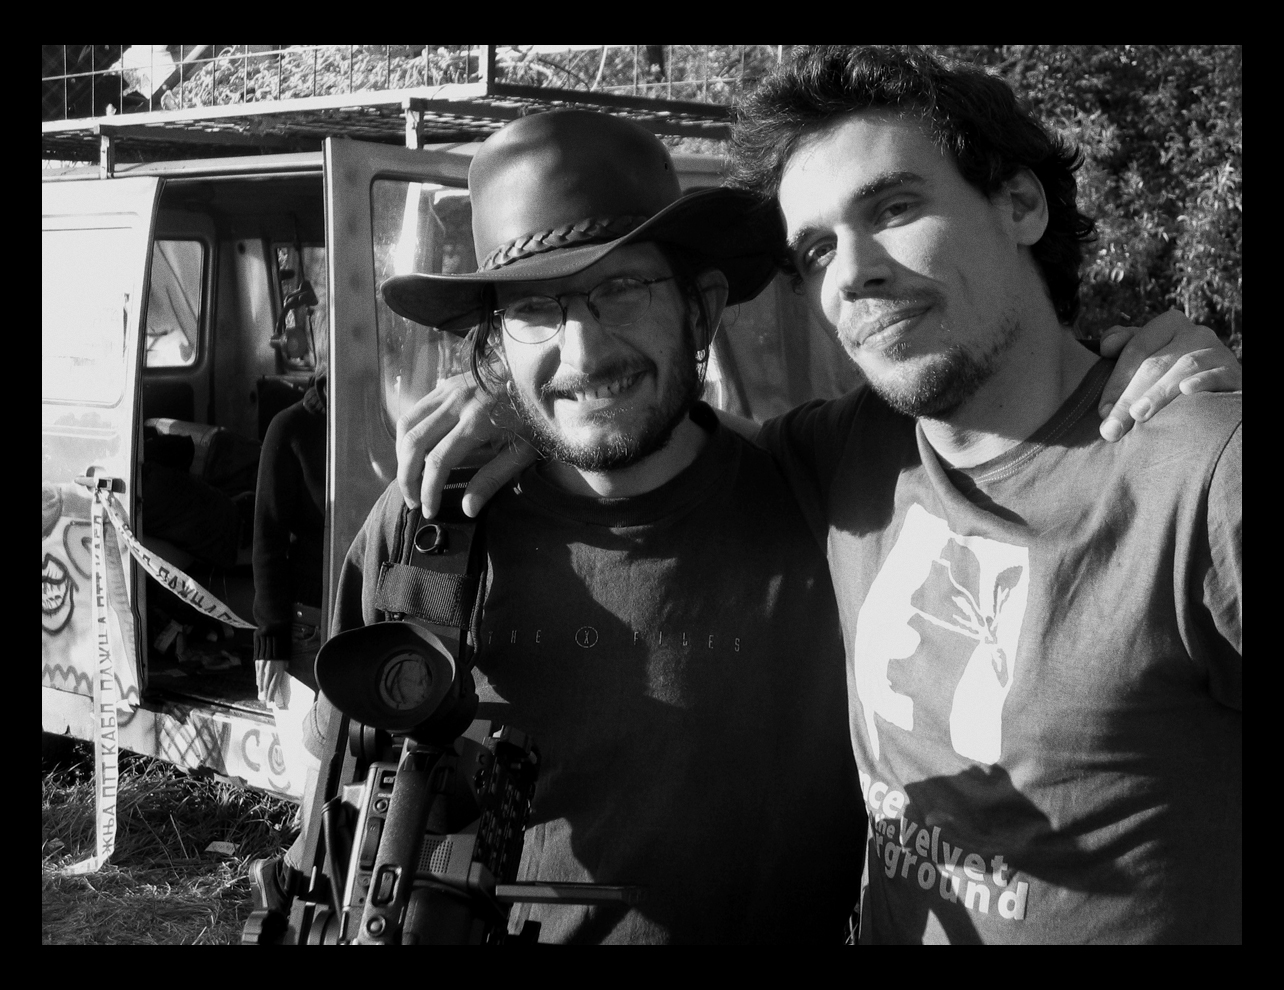 With actor Mihajlo Jovanovic, on set of Life and Death of Porno Gang. 2007.